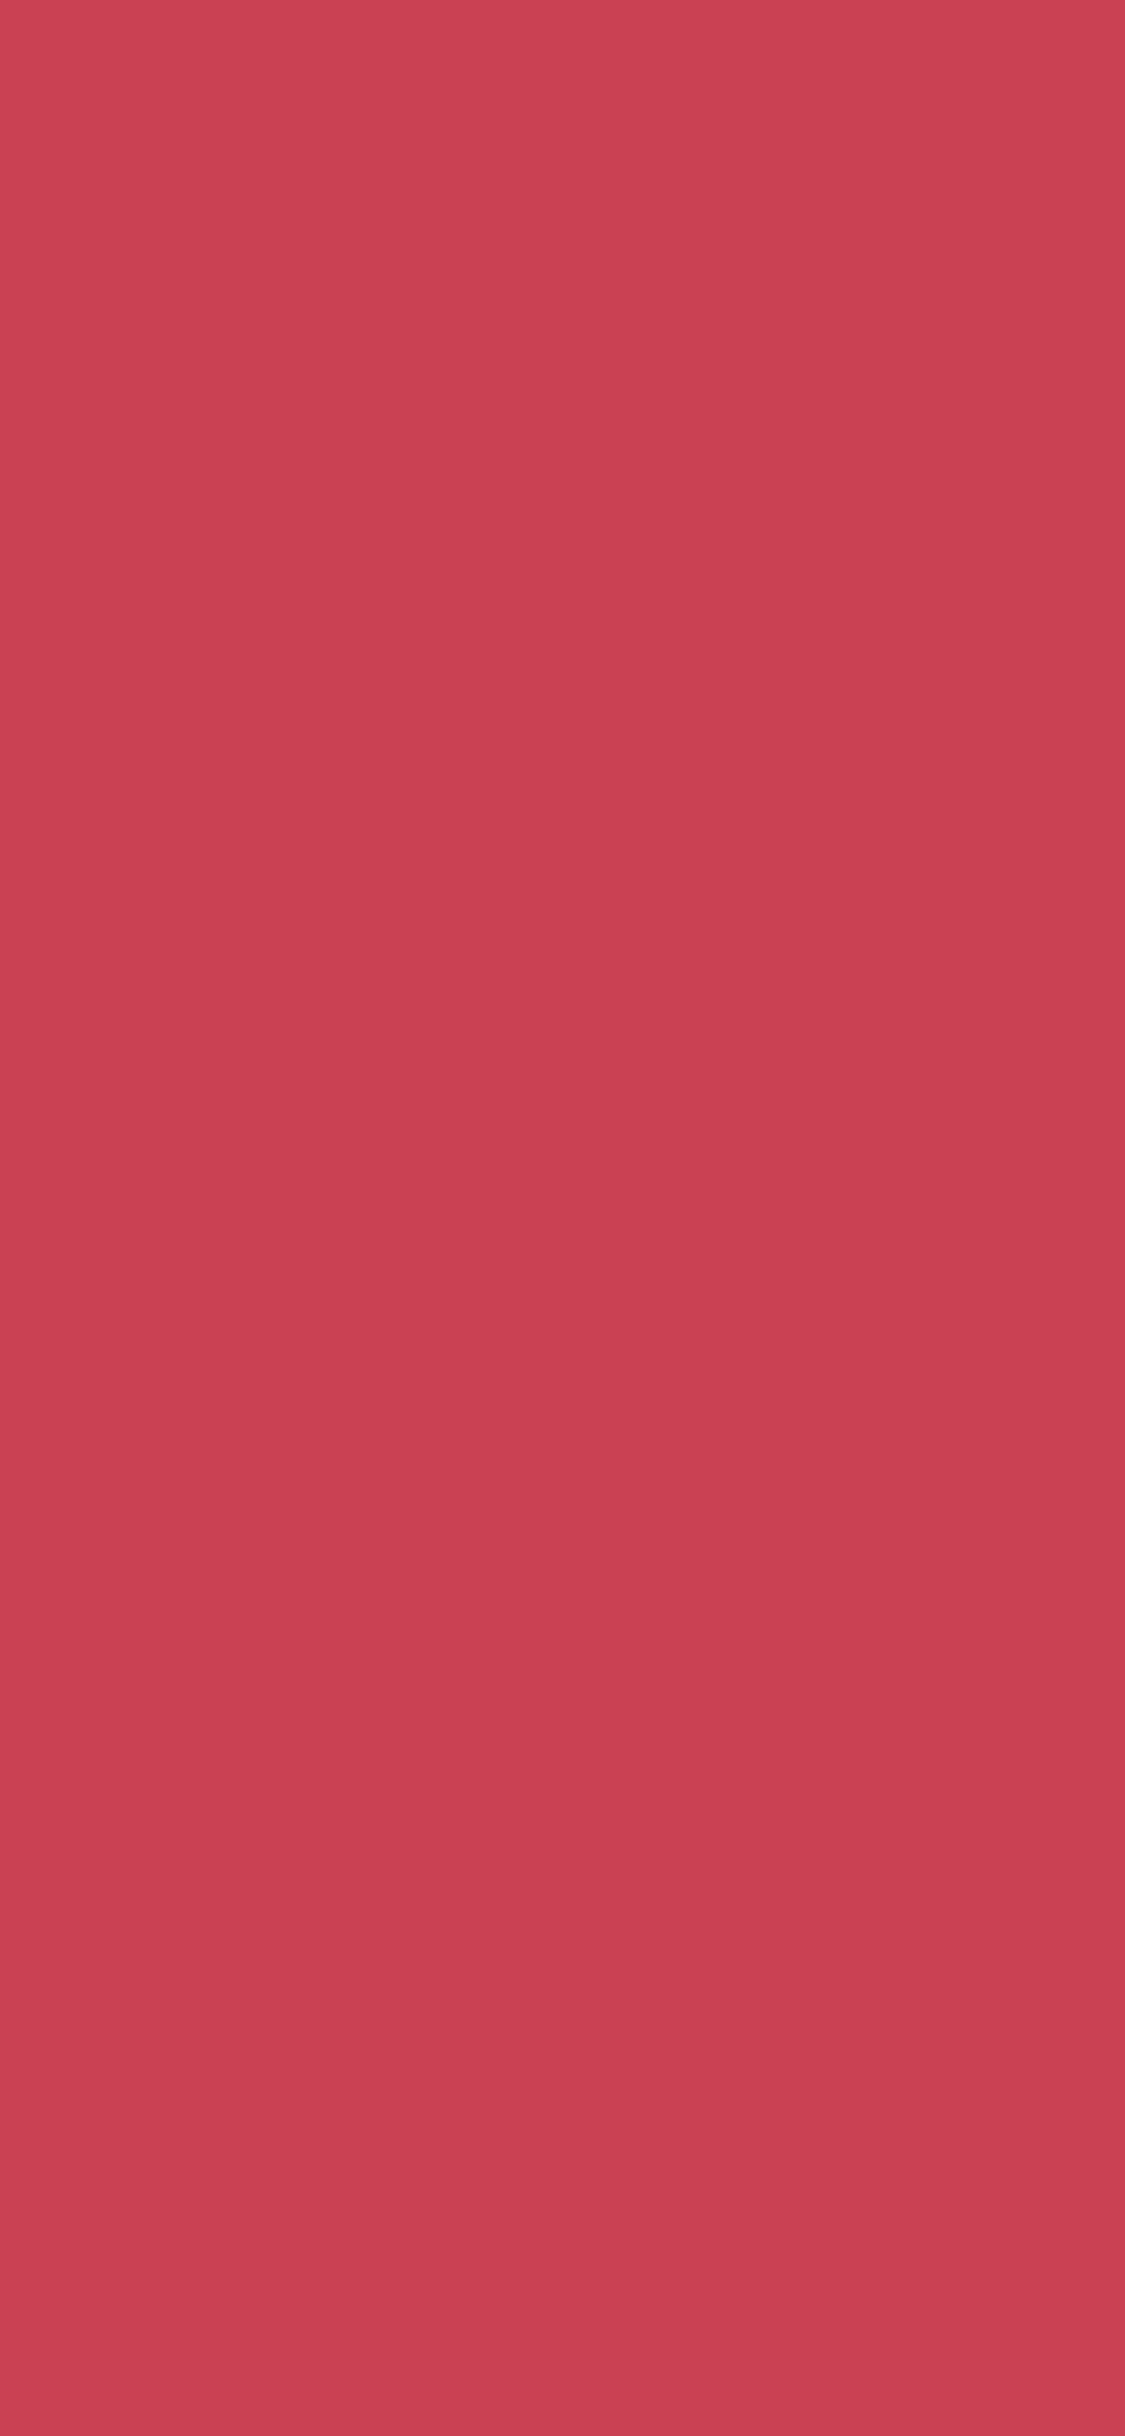 1125x2436 Brick Red Solid Color Background